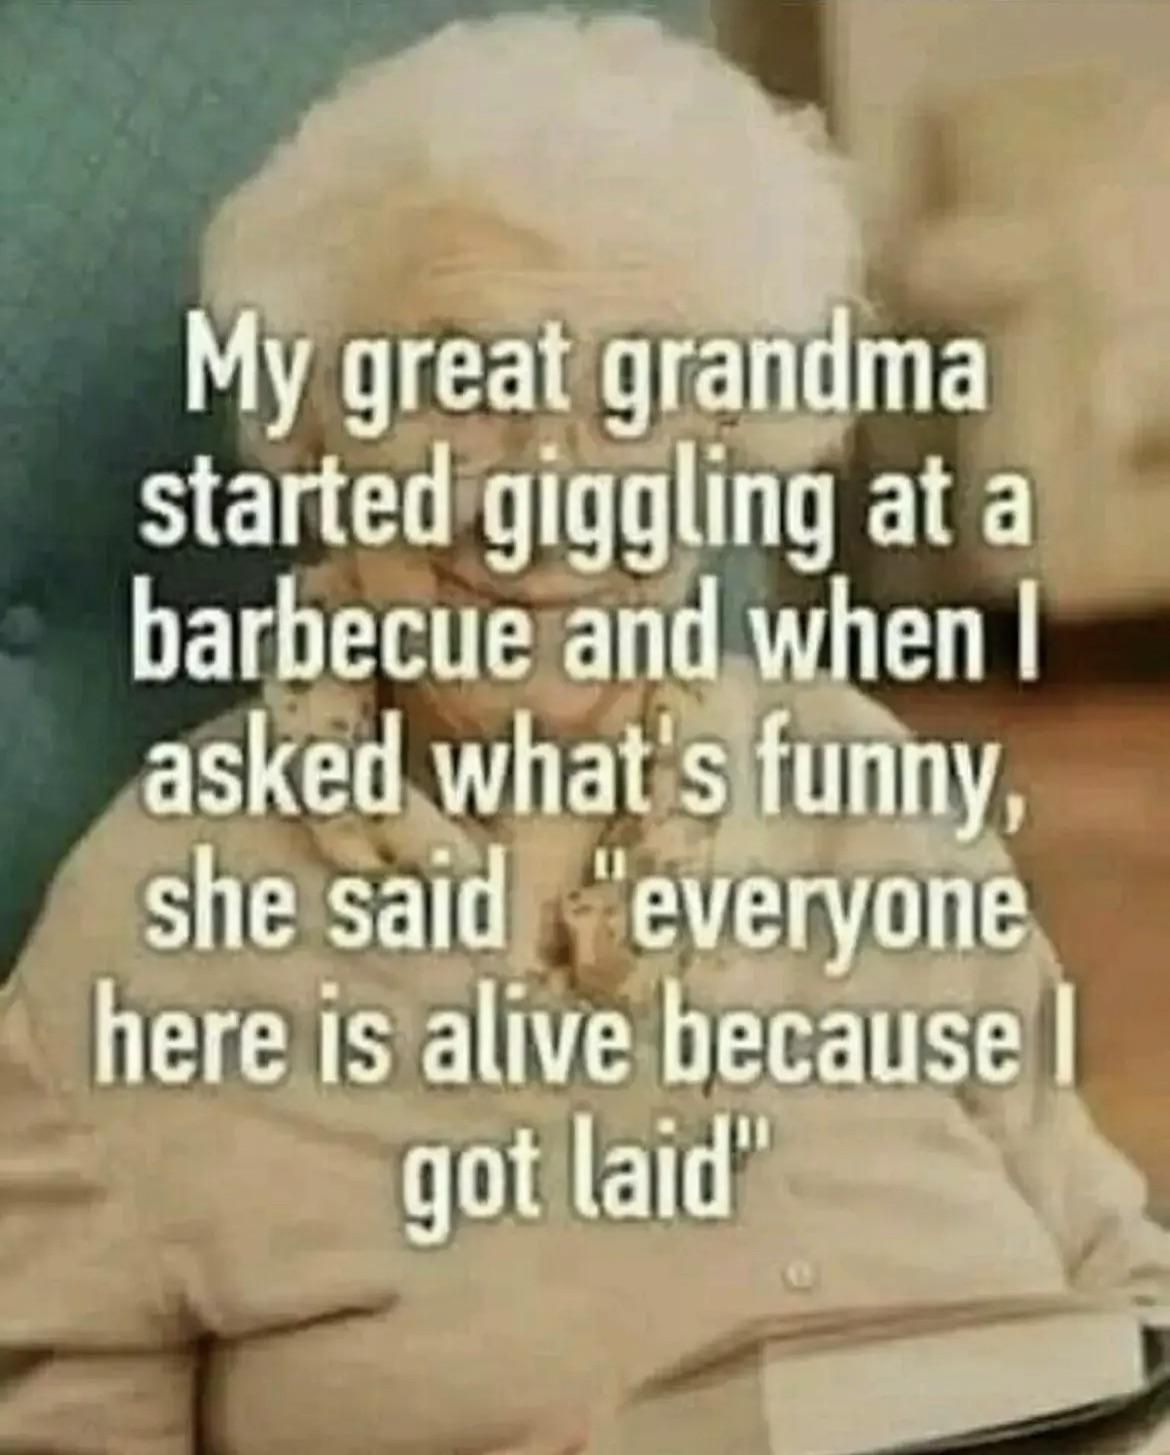 Granny spitting facts